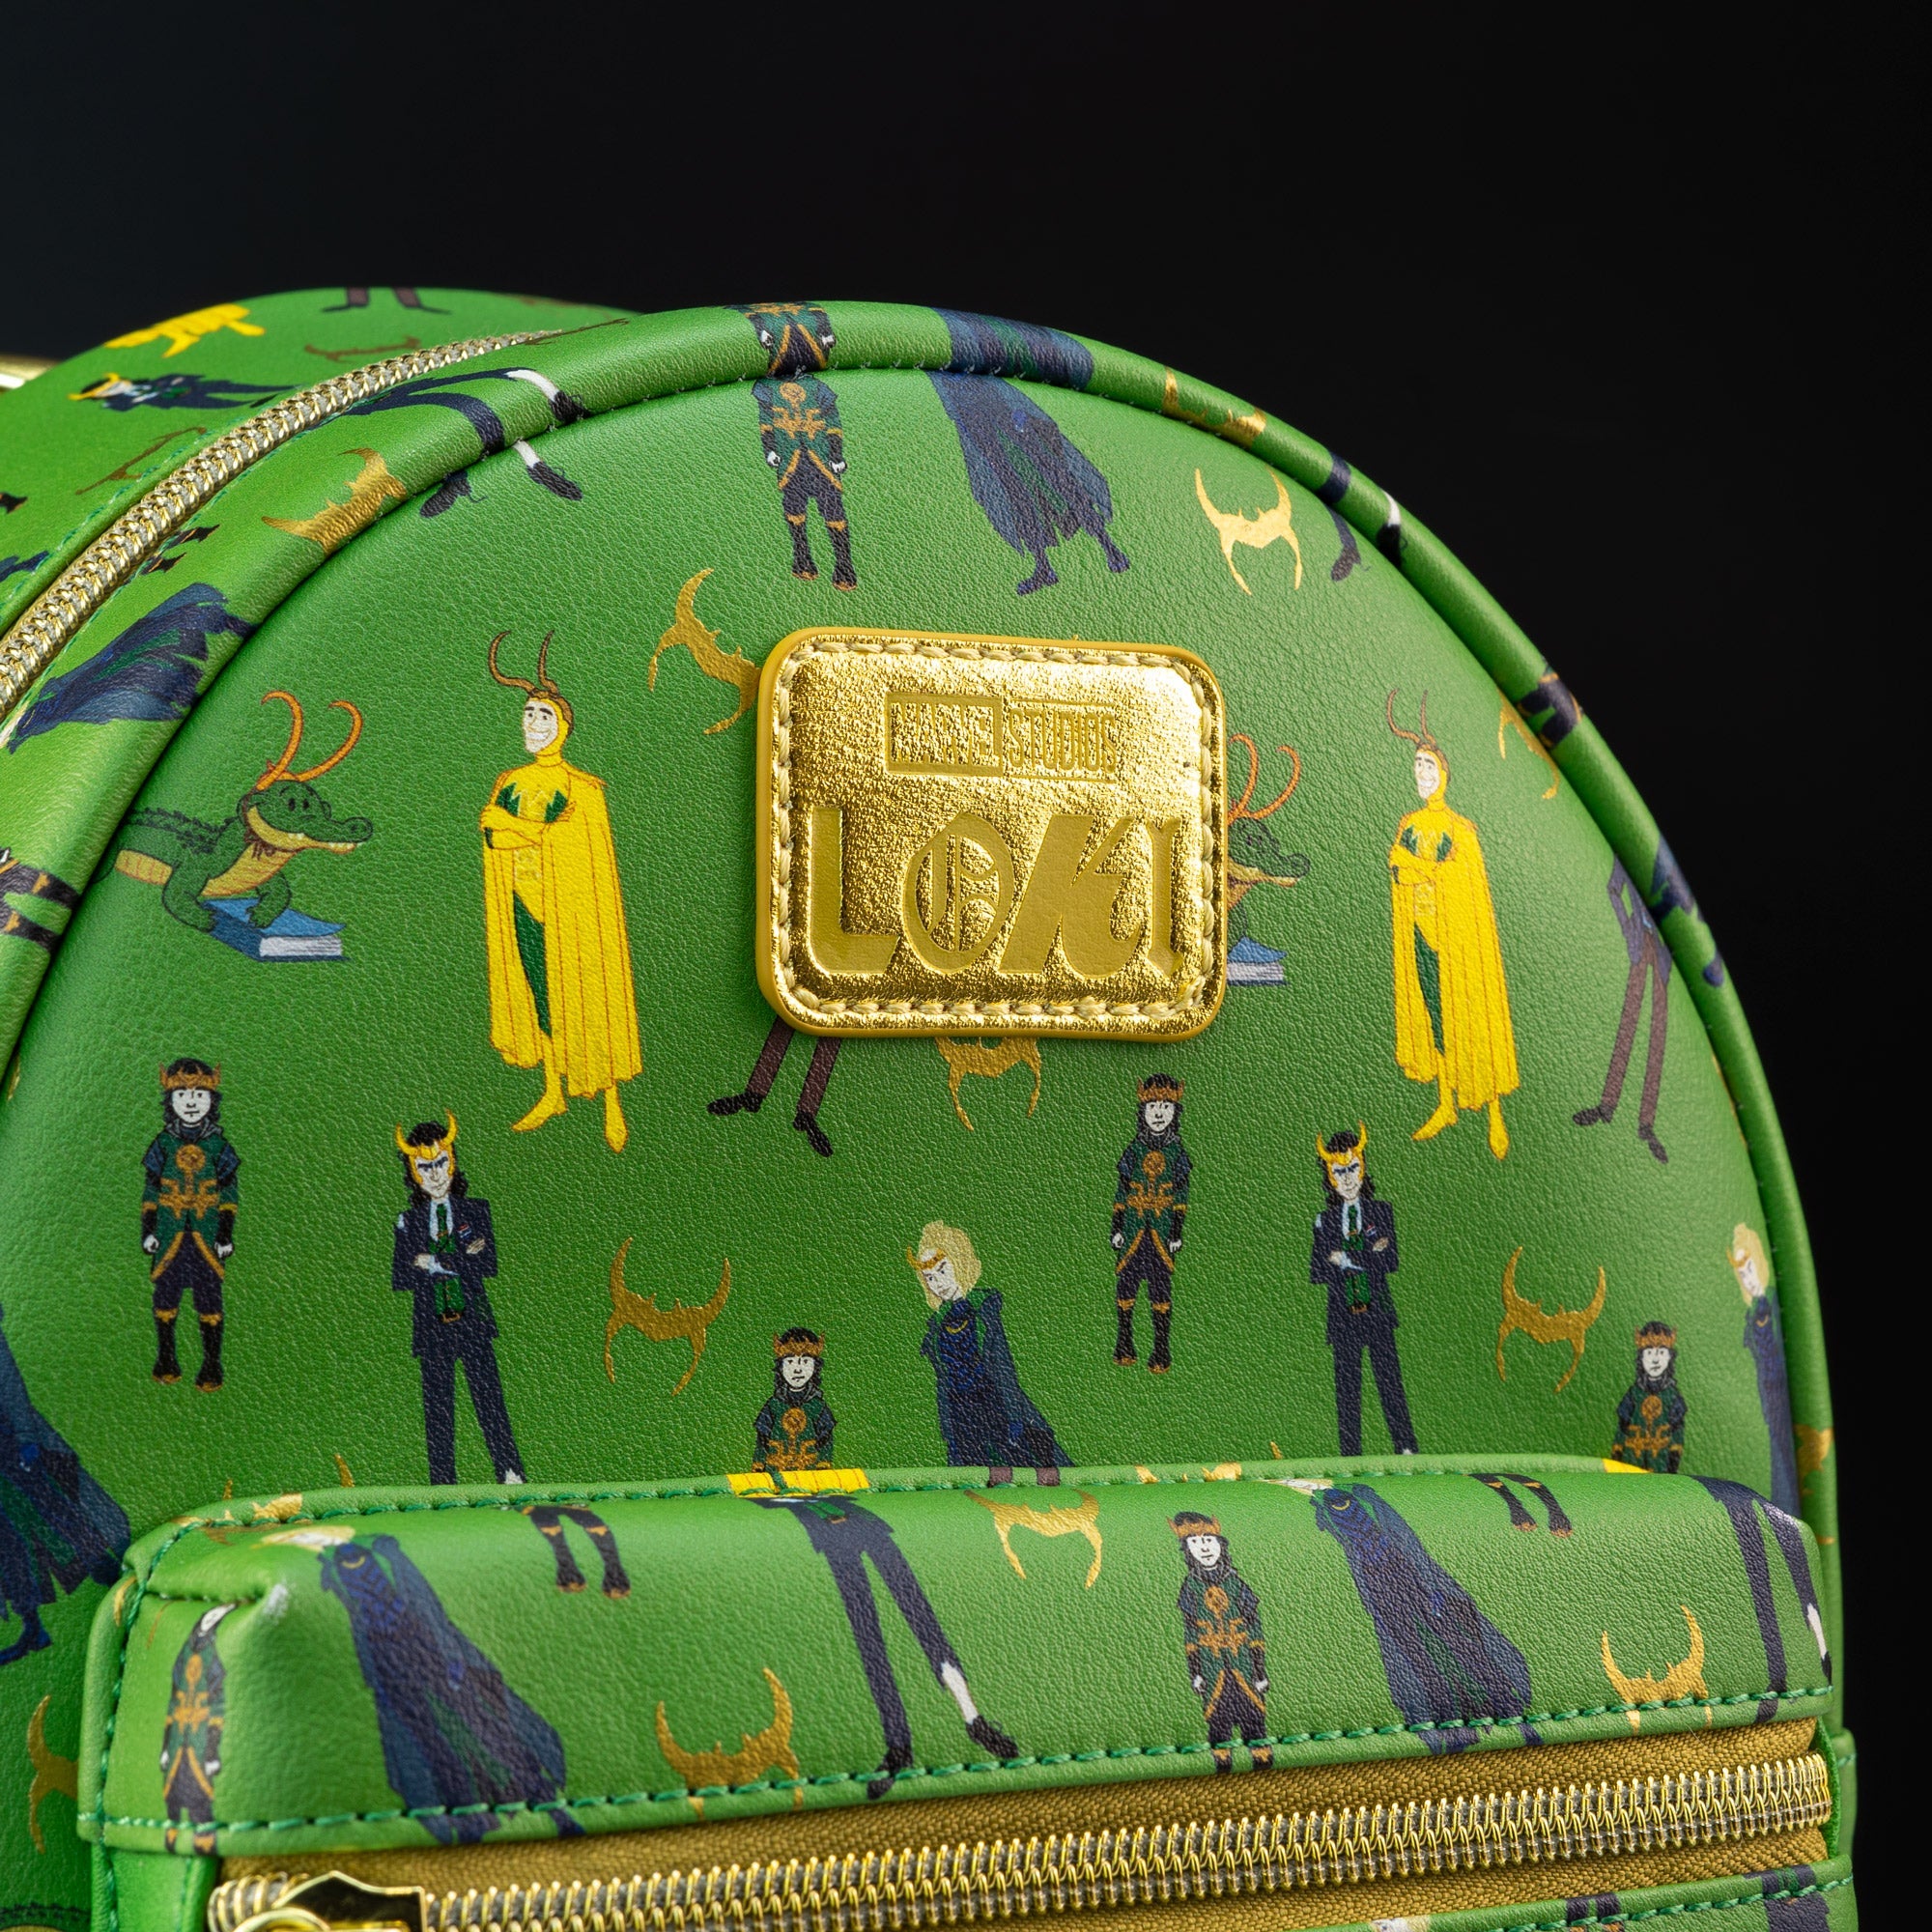 Loungefly x Marvel Loki Variants All Over Print Mini Backpack - GeekCore